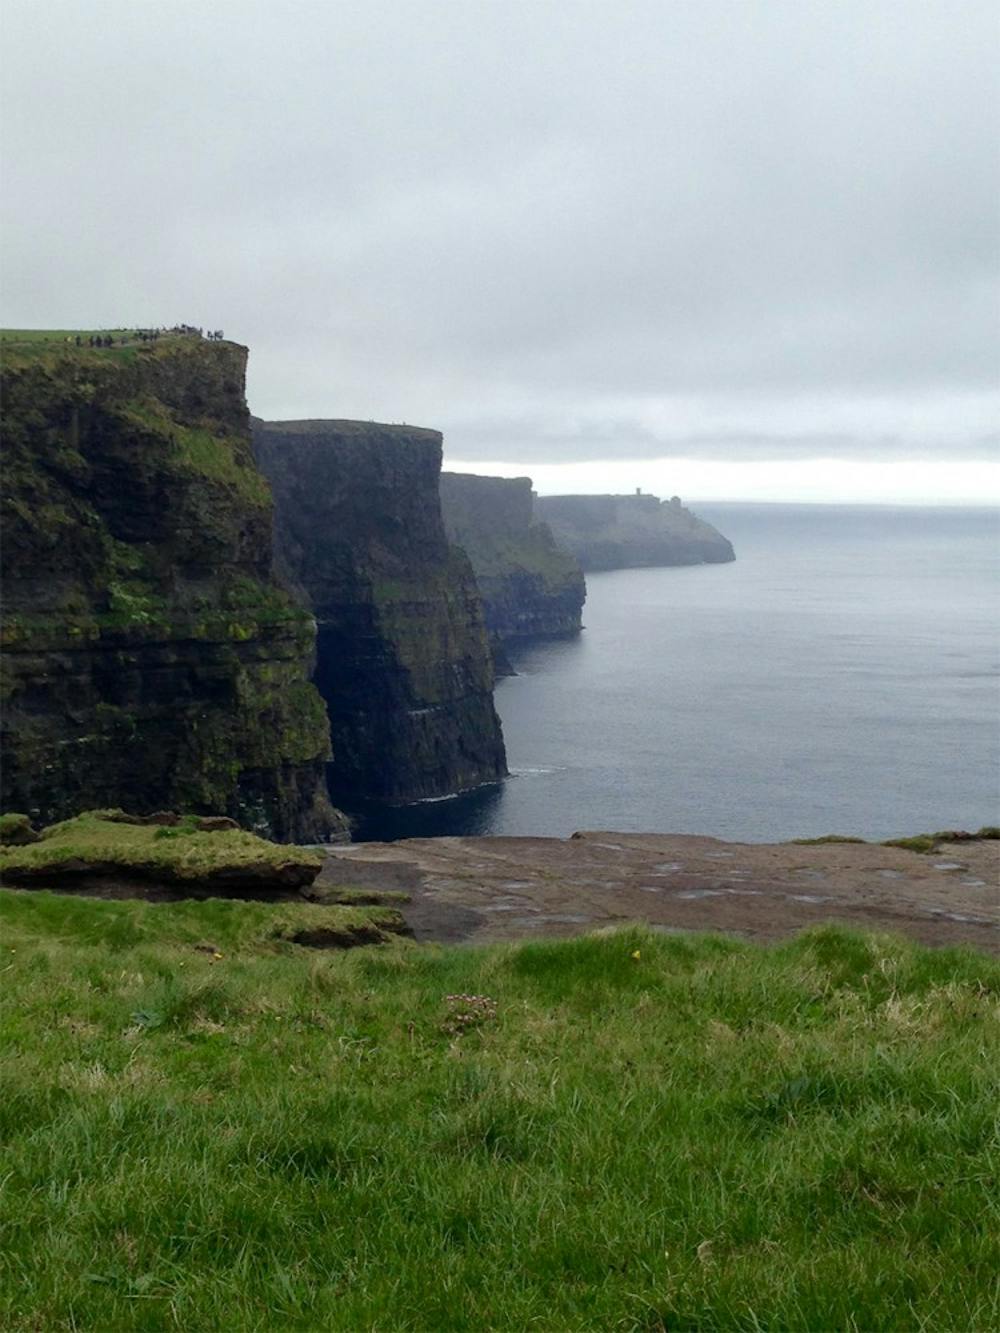 View of the Cliffs of Moher, Ireland. They are so tall that it takes a full 11 seconds to reach the water below.